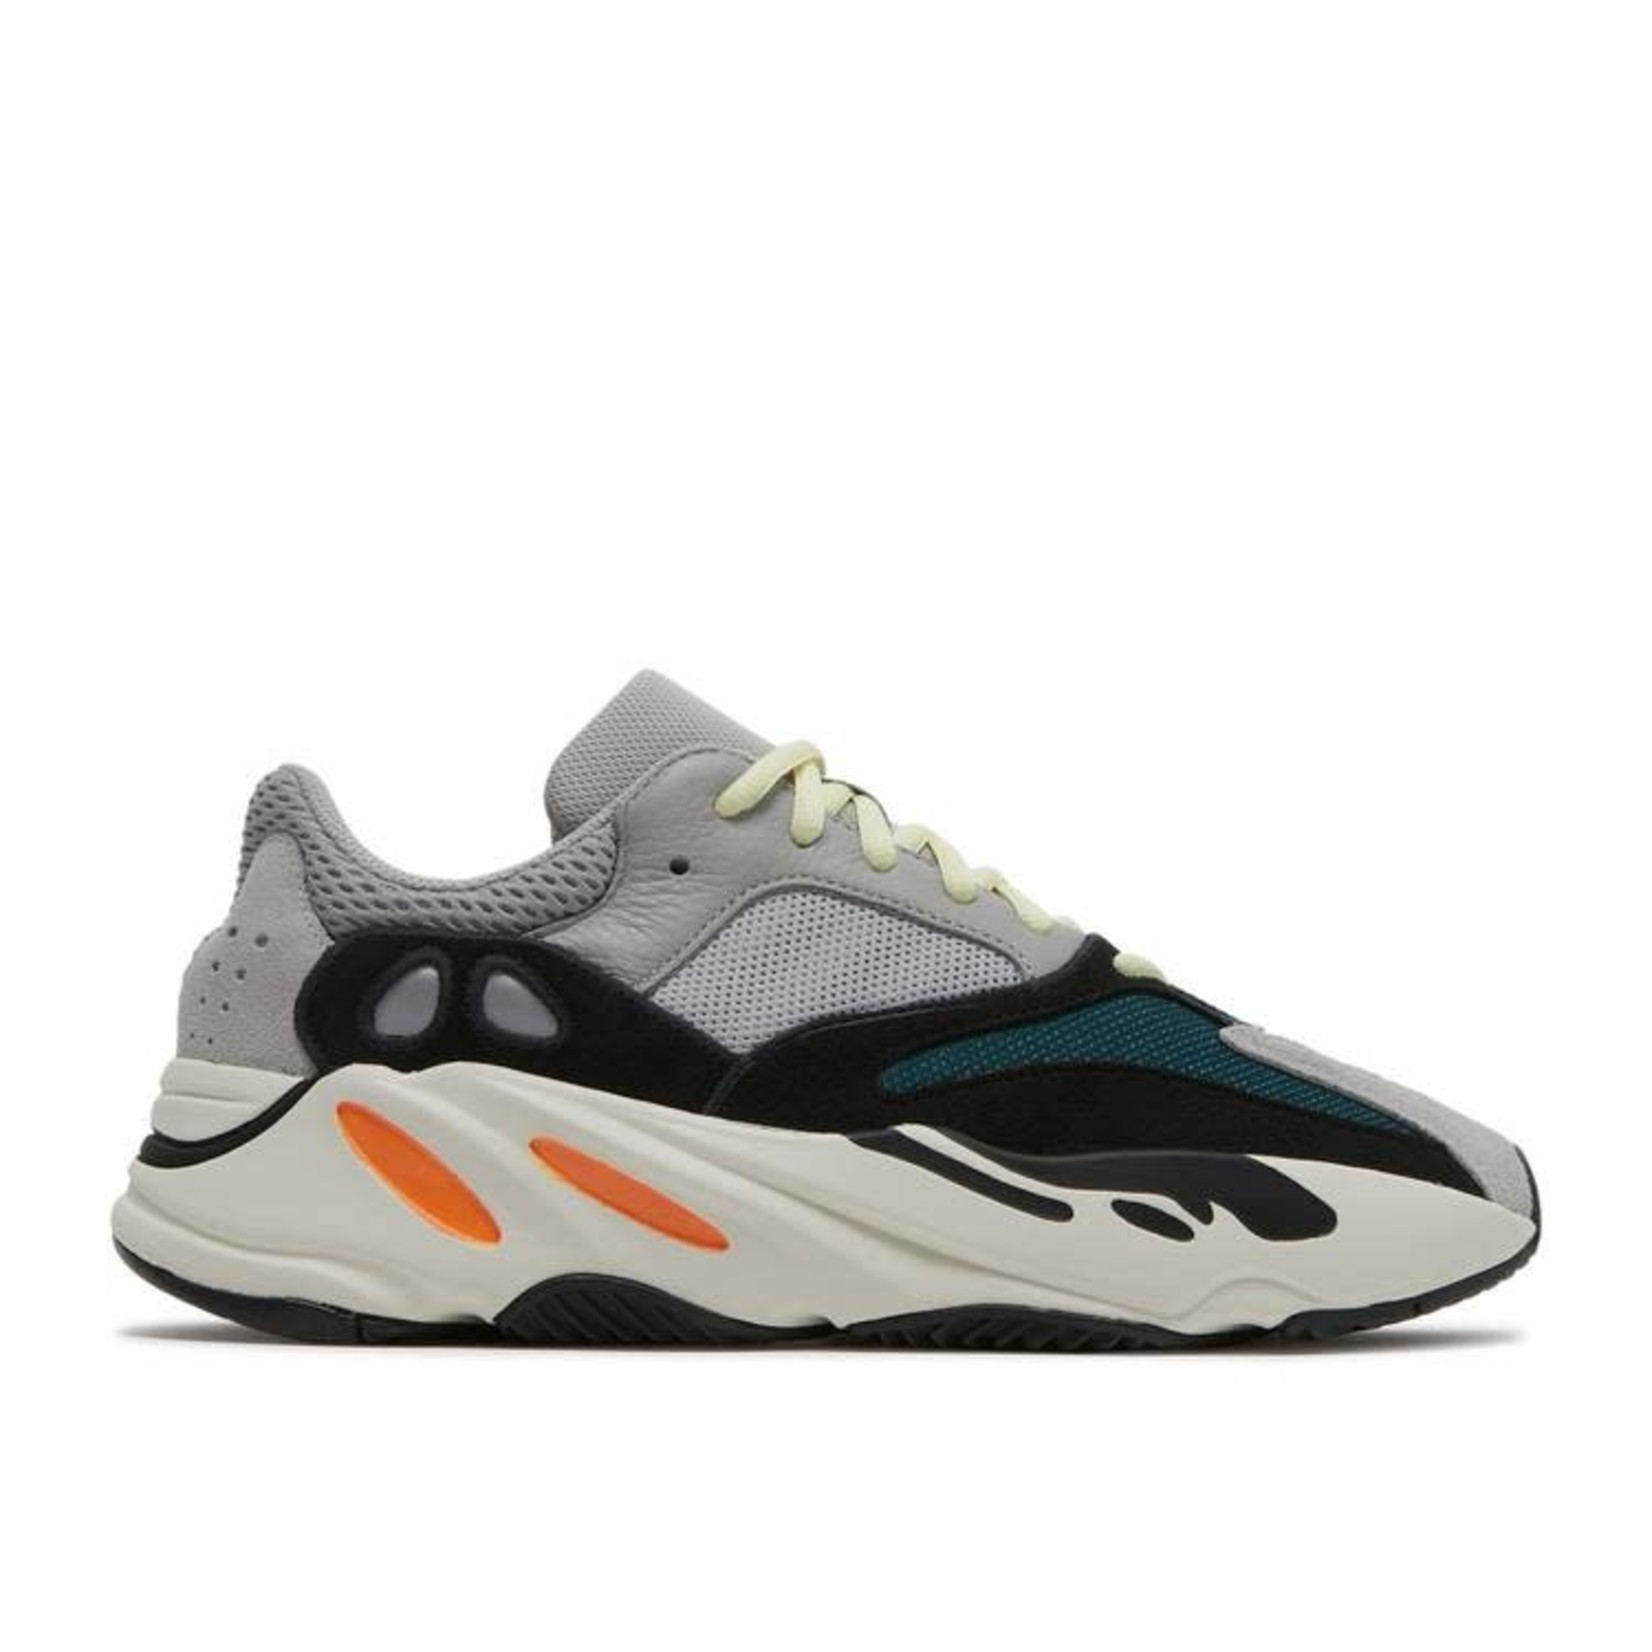 Adidas Adidas Yeezy Boost 700 Wave Runner Solid Grey Size 12, DS Brand New